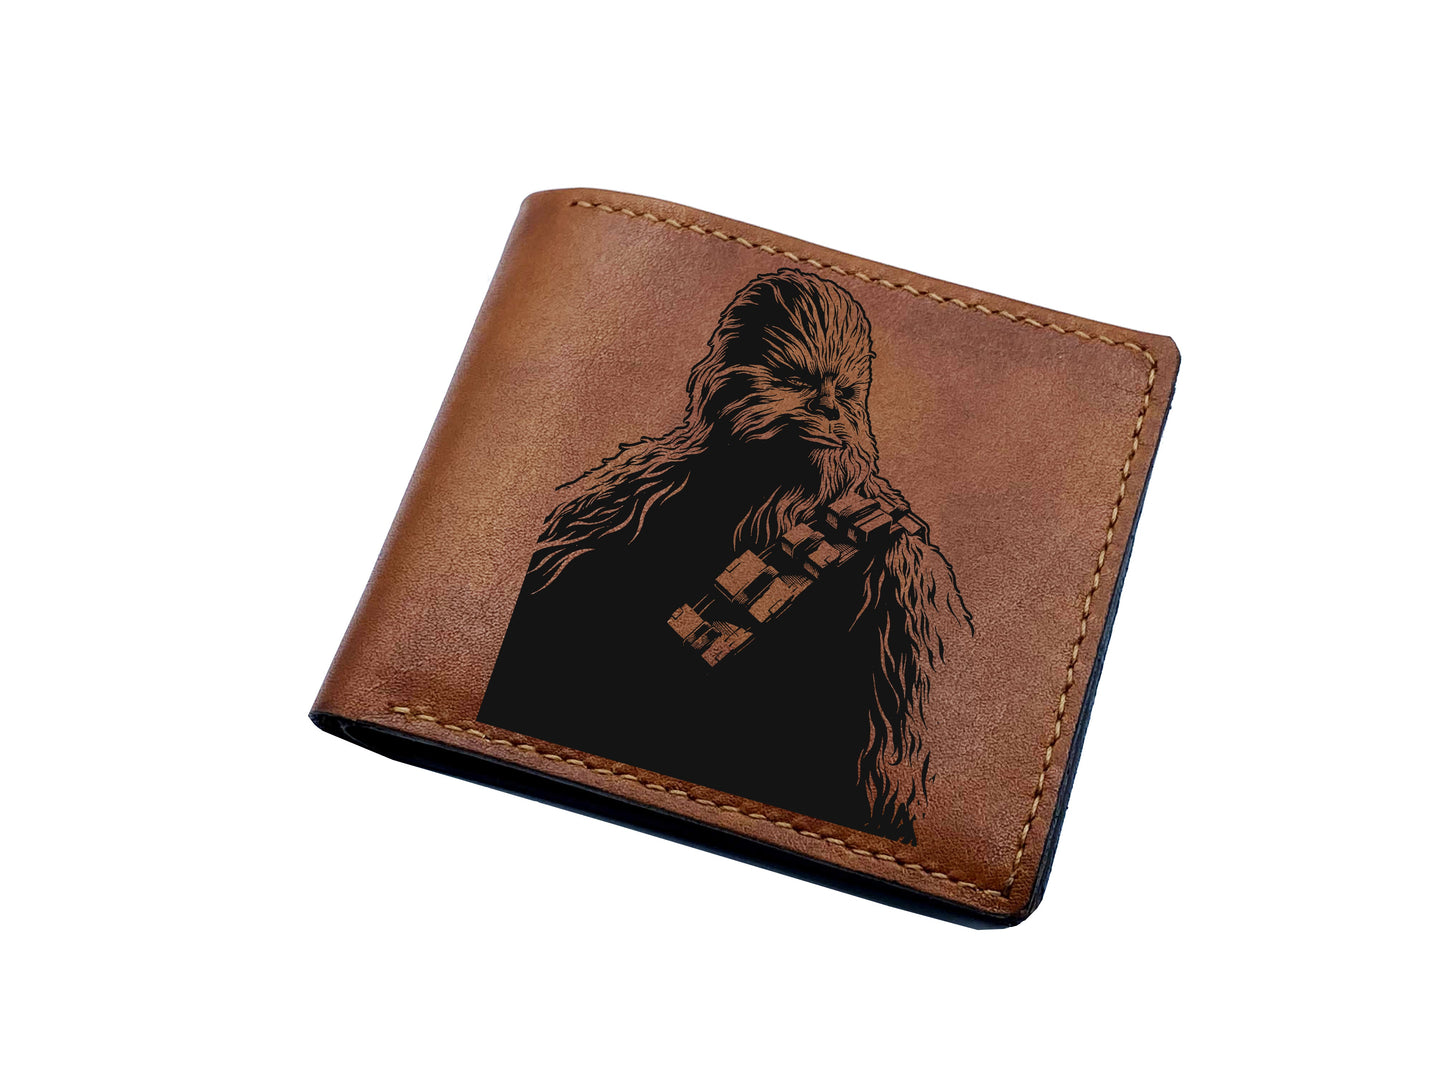 Customized leather Starwars wallet, bifold leather wallet for him, leather anniversary present, birthday gift for boyfriend